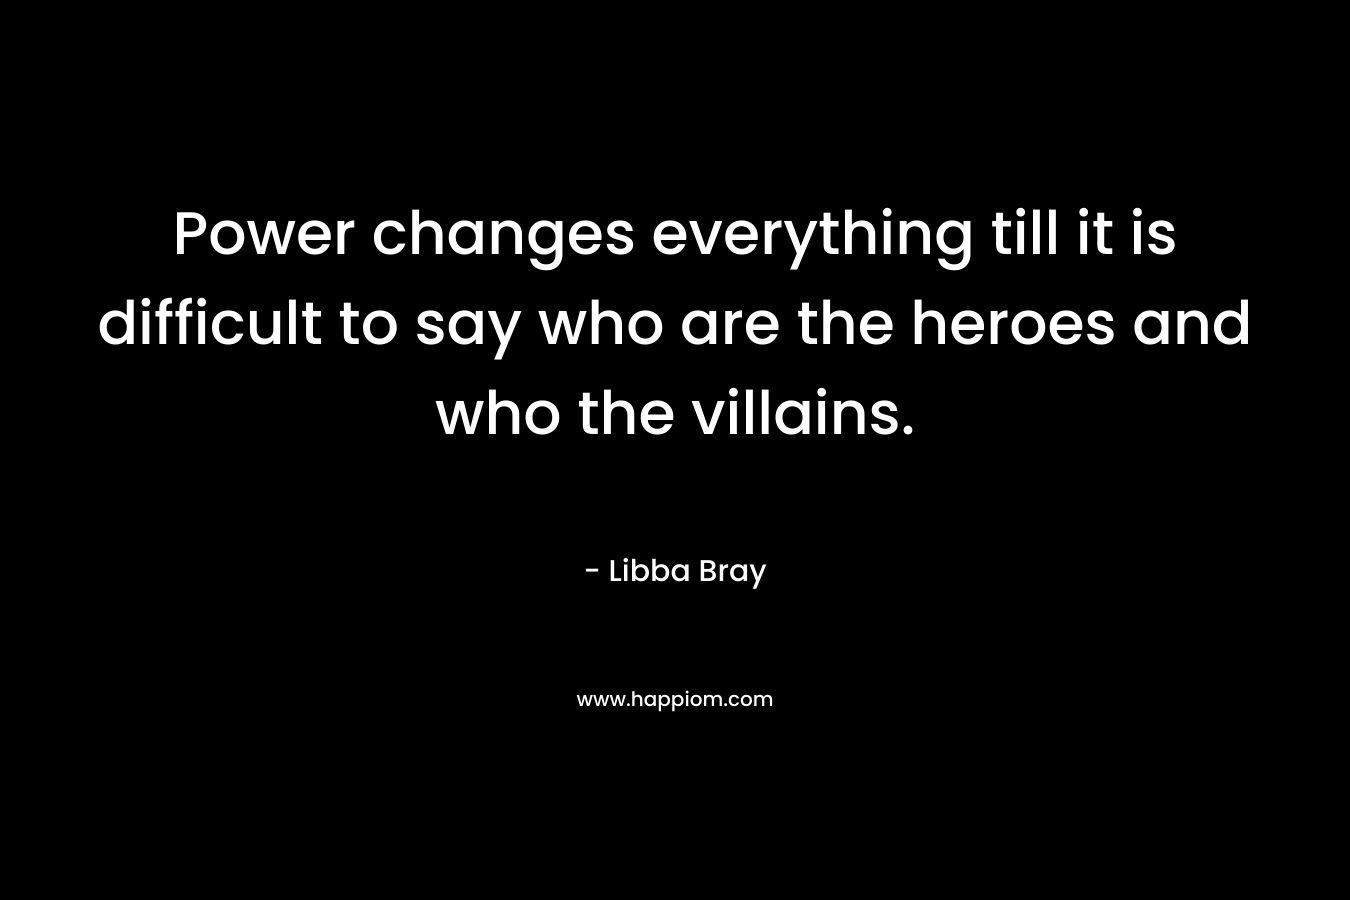 Power changes everything till it is difficult to say who are the heroes and who the villains.